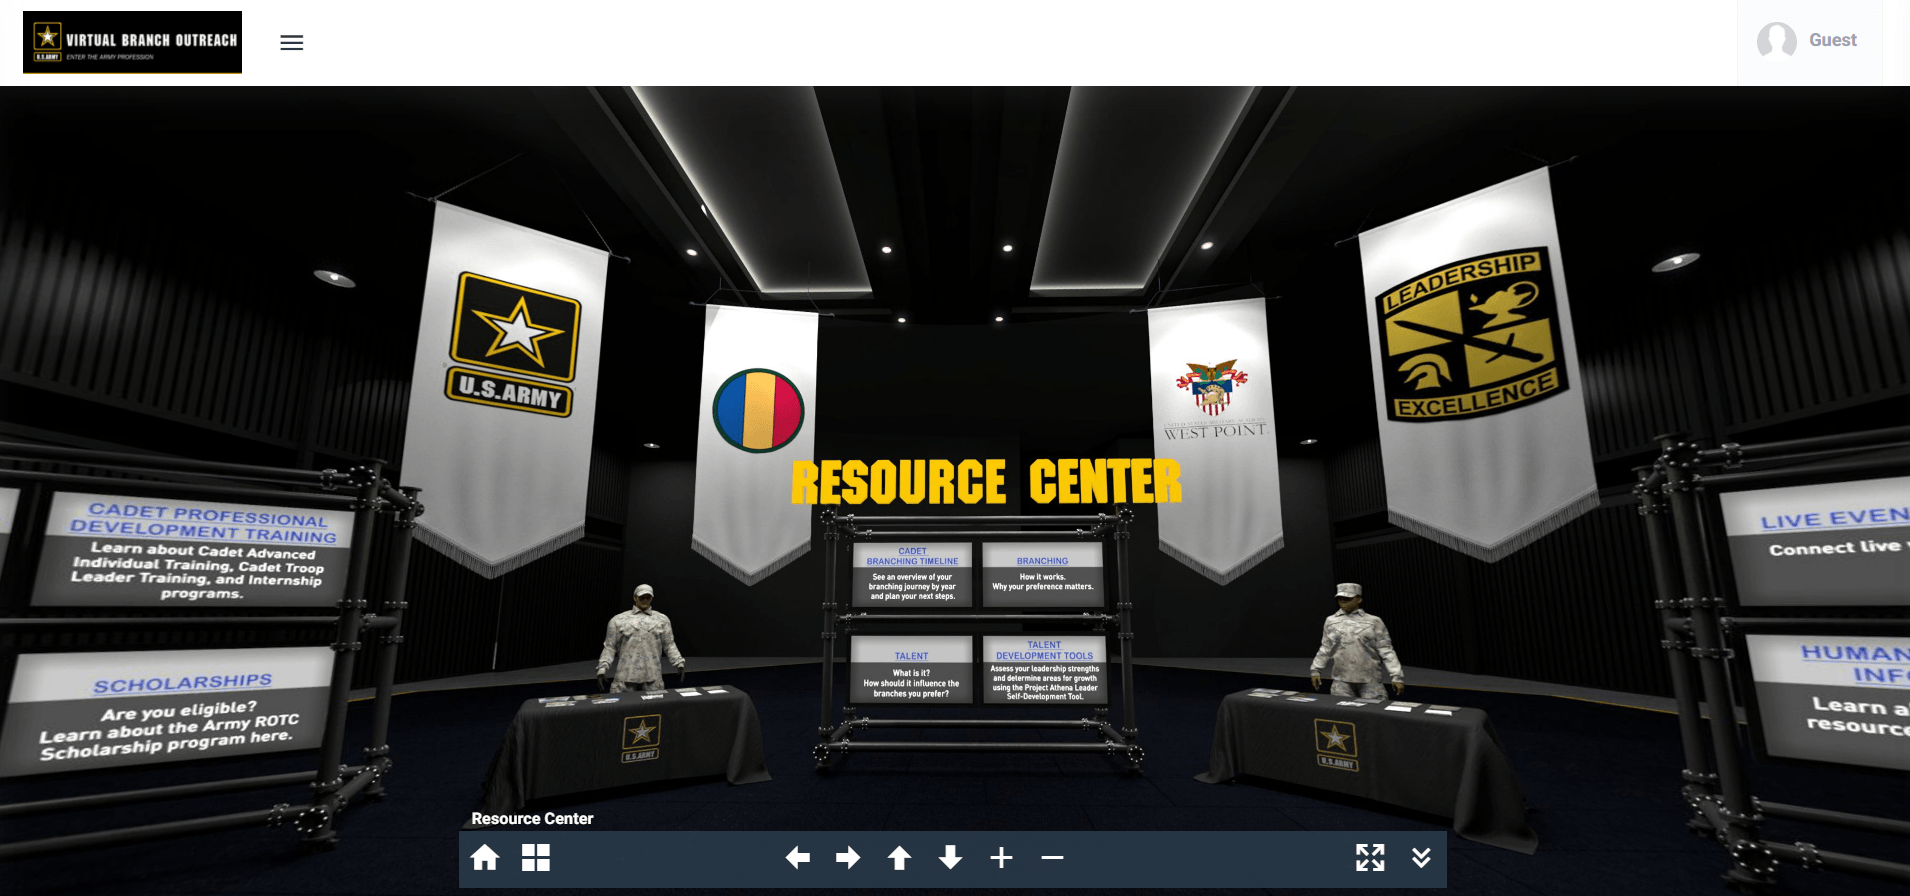 Figure 1: The “Resource Center” of the Army Virtual Branch Outreach serves as a home page where cadets can learn how to navigate the environment, find the live event schedule, and access all other rooms and booths.